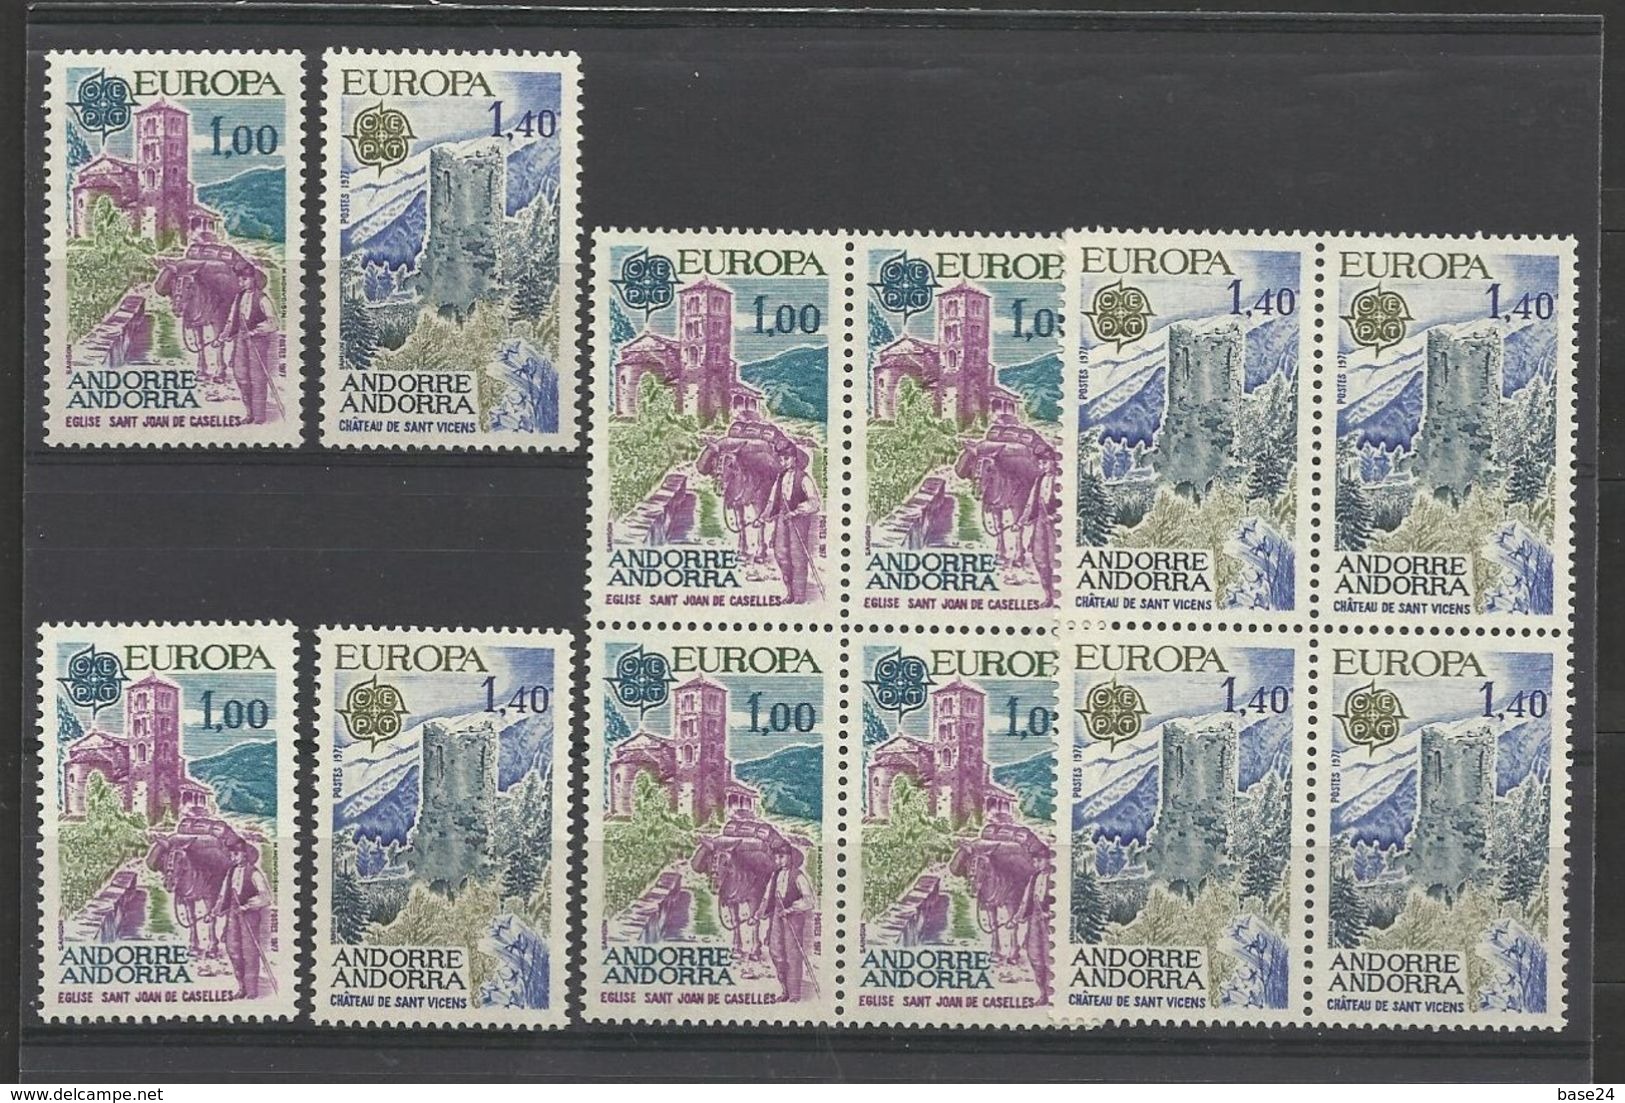 1977 Andorra Francese French EUROPA CEPT EUROPE 6 Serie Di 2v. MNH** - 1977